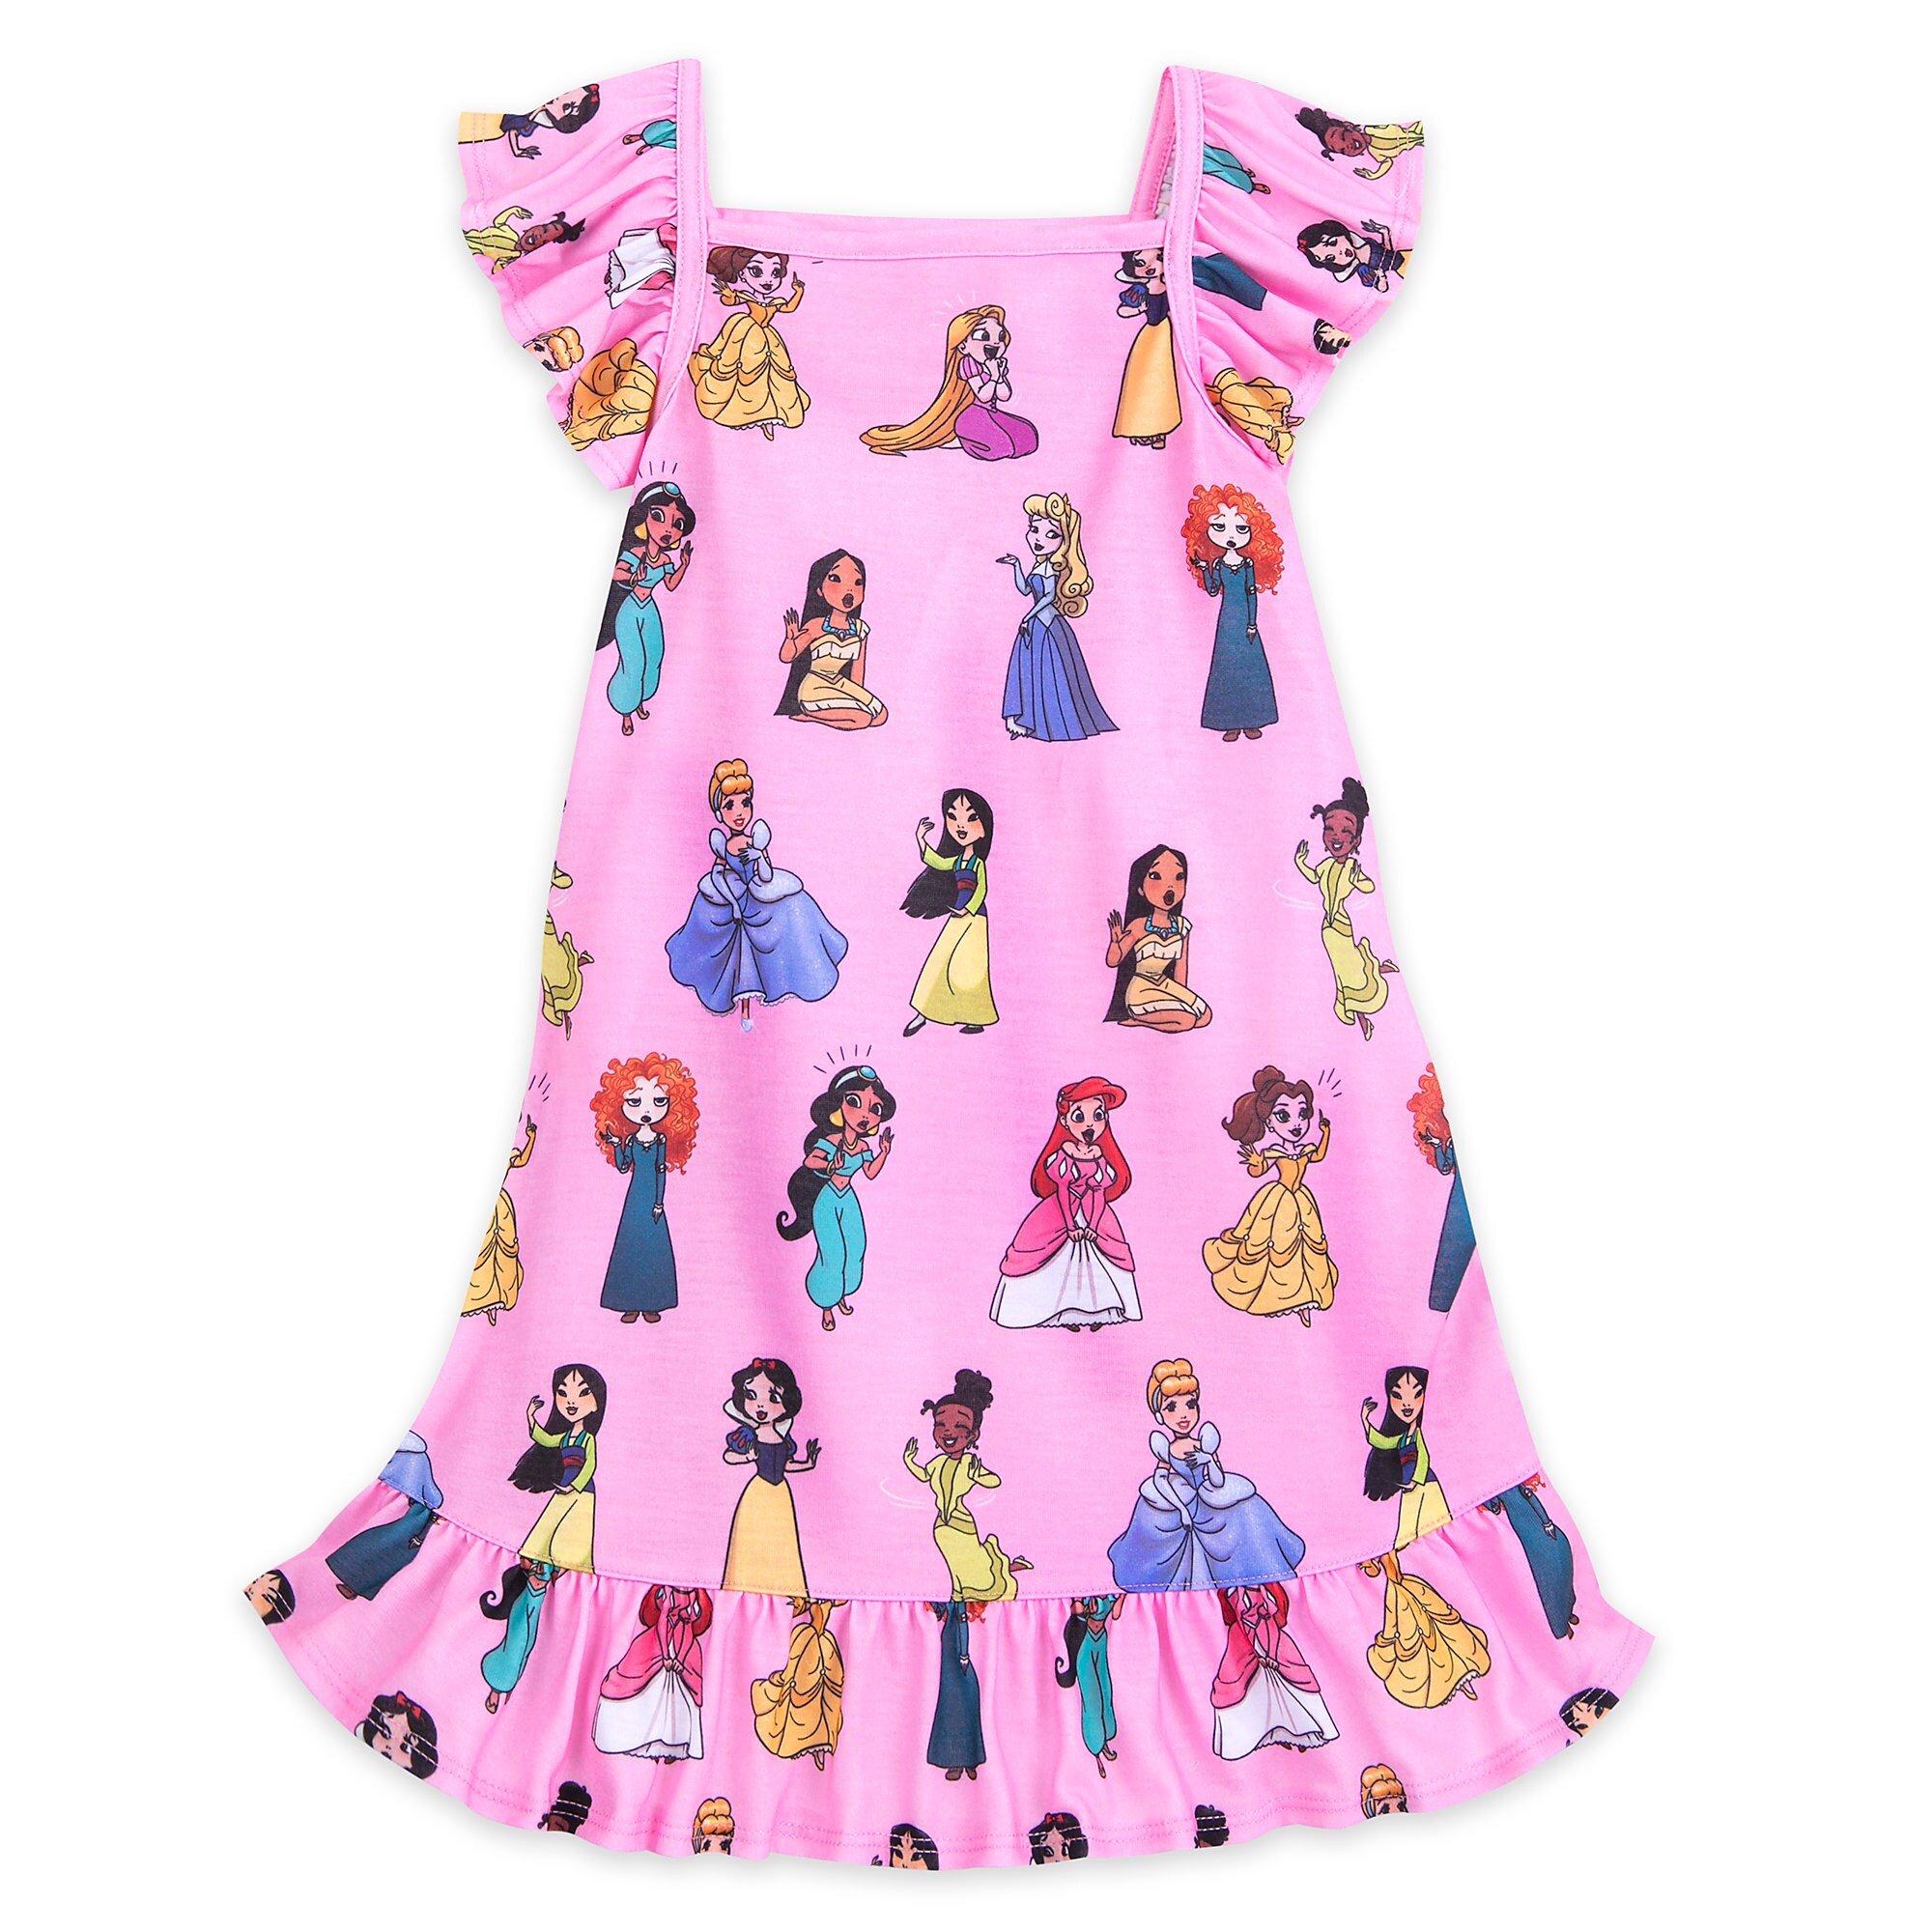 Disney Princess Nightshirt for Girls is now out – Dis Merchandise News